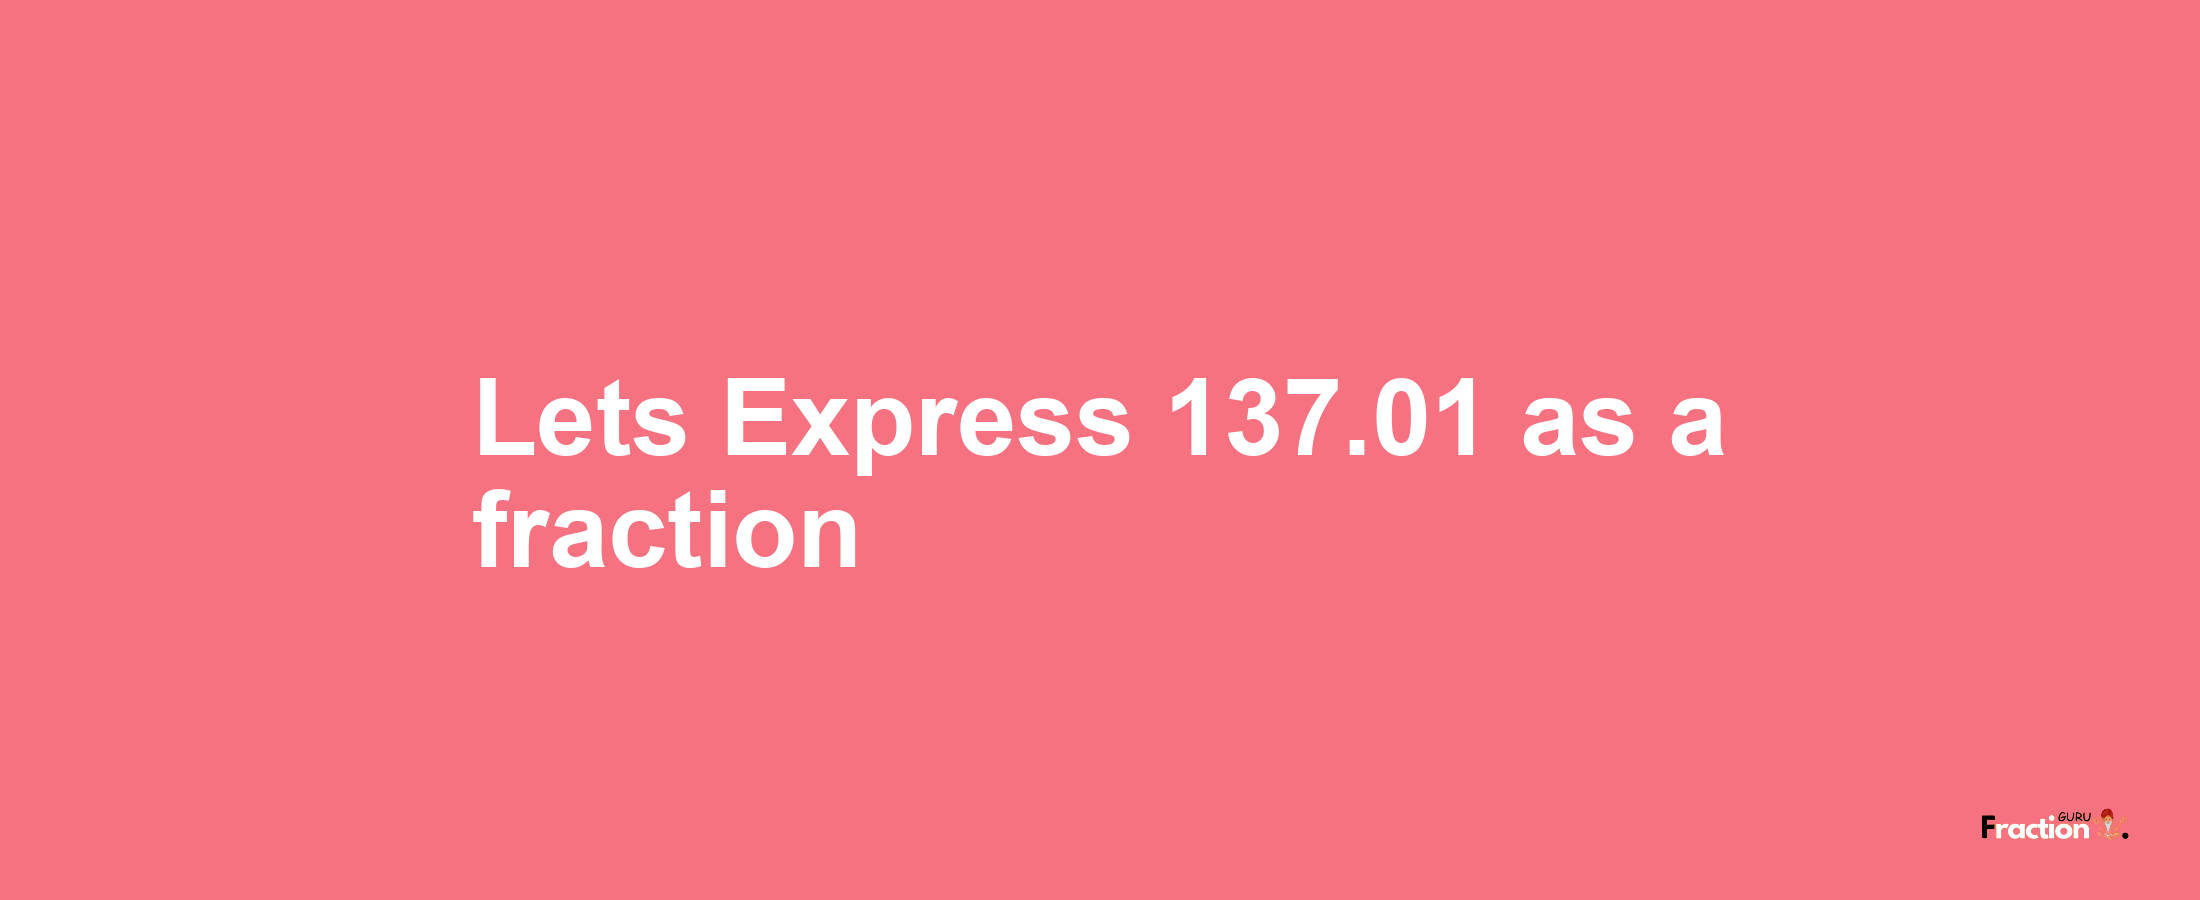 Lets Express 137.01 as afraction